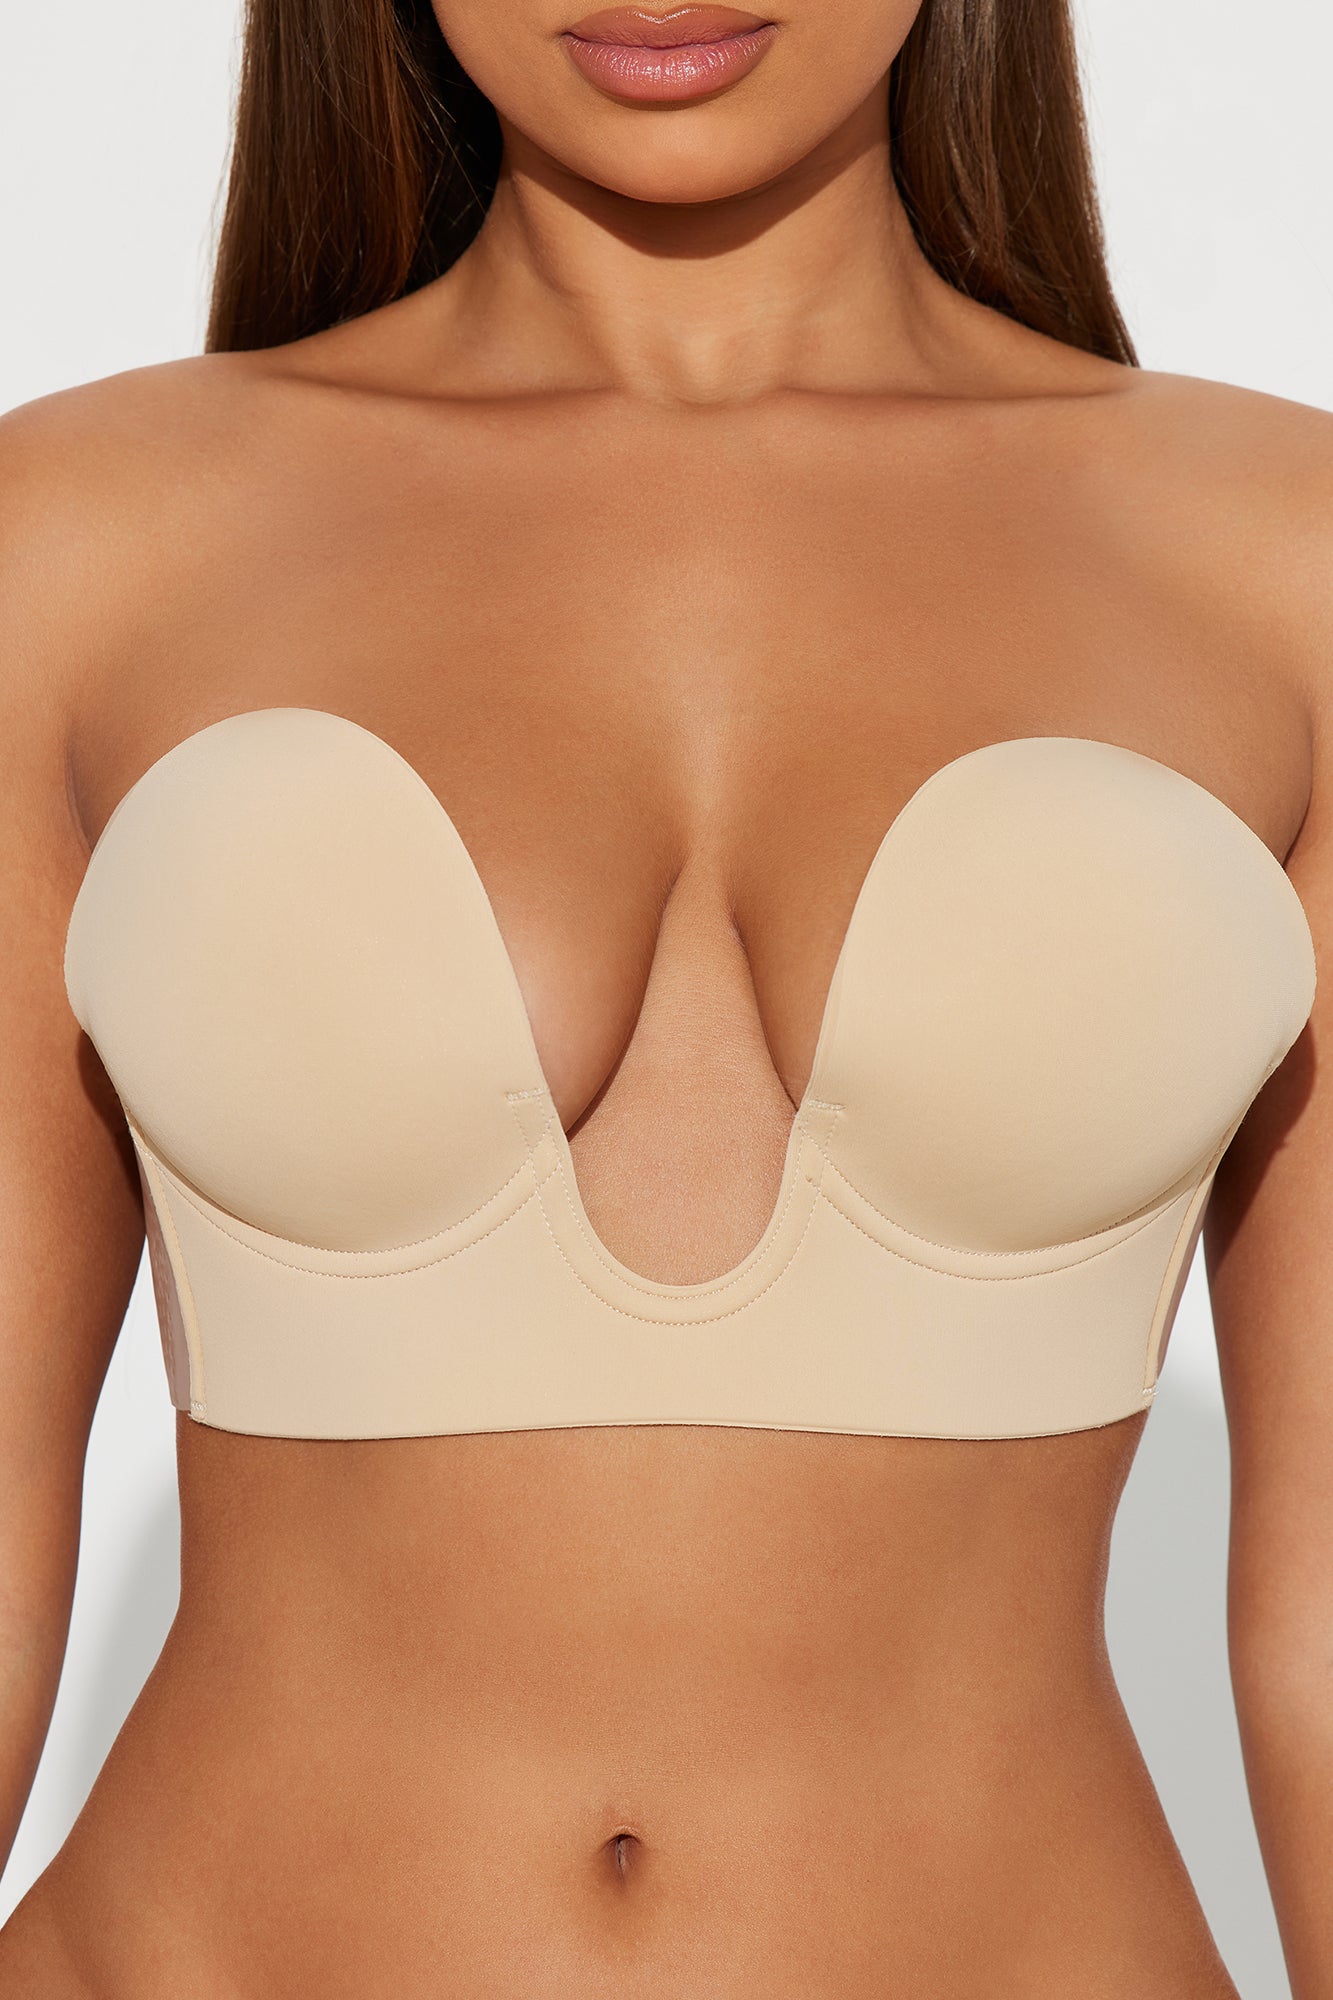 Natural Curves Tear Drop Silicone Lift Pastie Bra - Clear